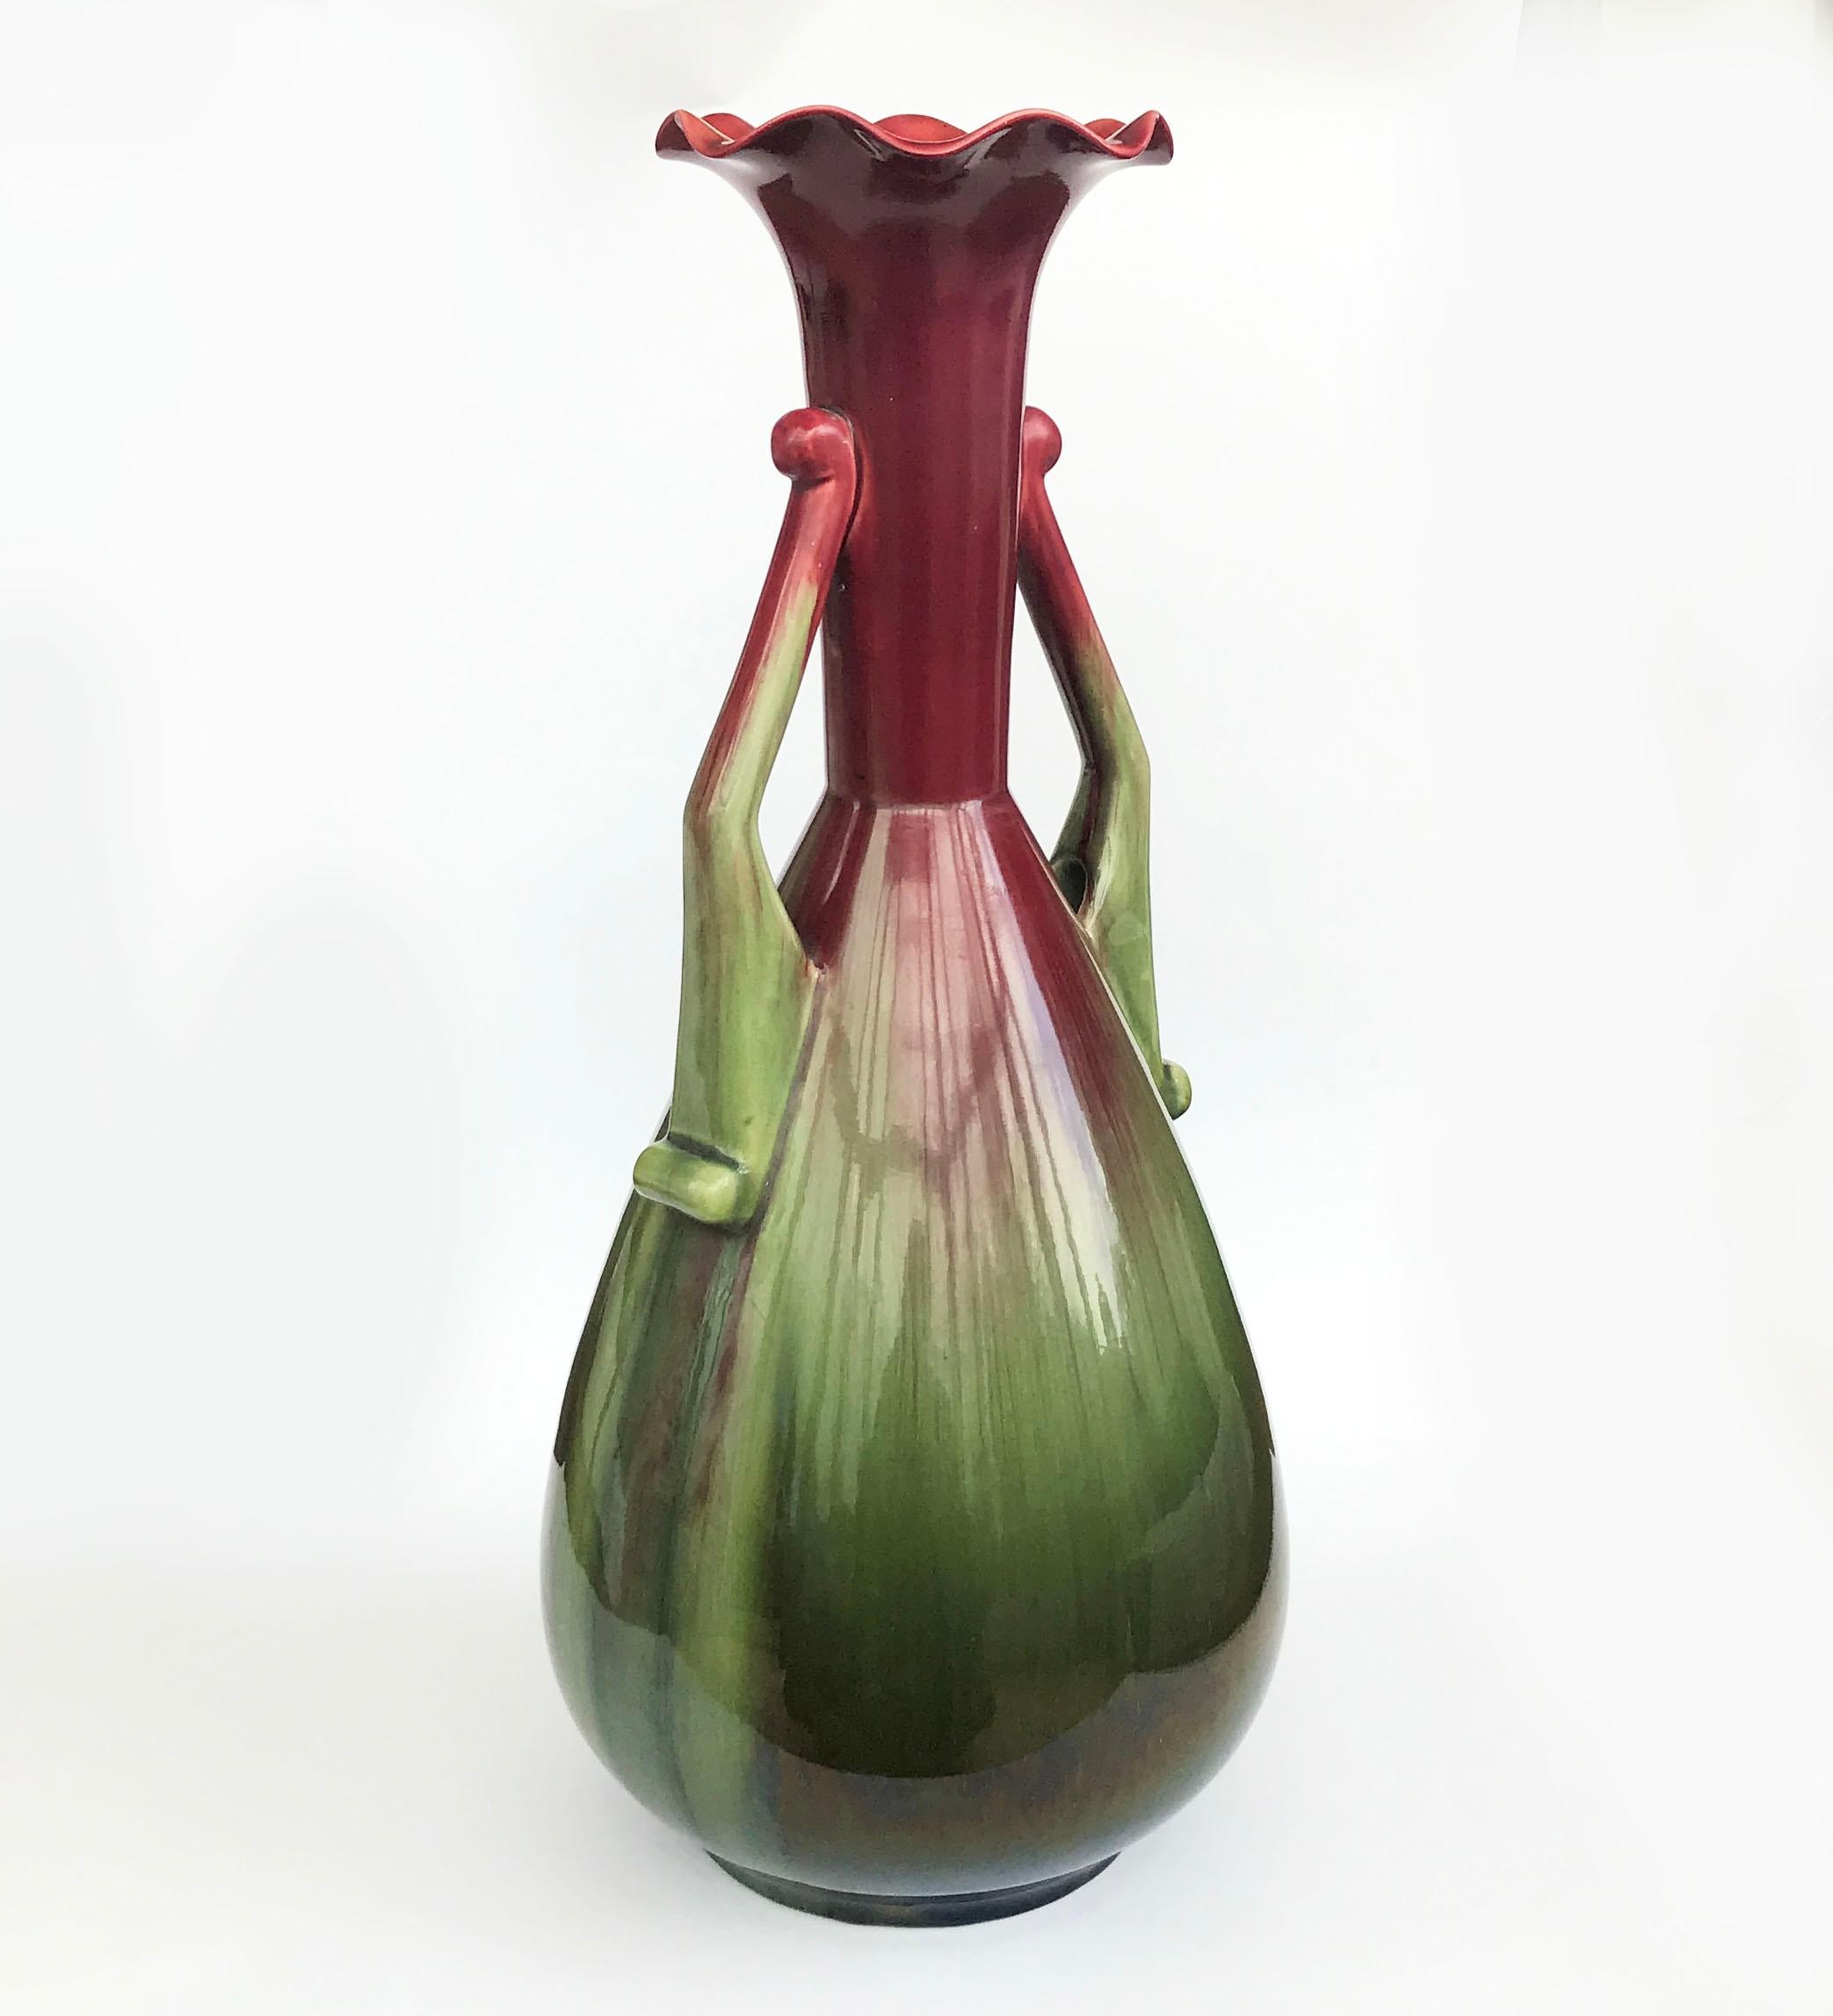 A wonderful monumental Linthorpe Art Pottery vase designed by Christoper Dresser circa 1882. The design is a powerful Dresser shape depicting power, the handles reminiscent of arms with hands on hips, the two handled body decorated with deep red and